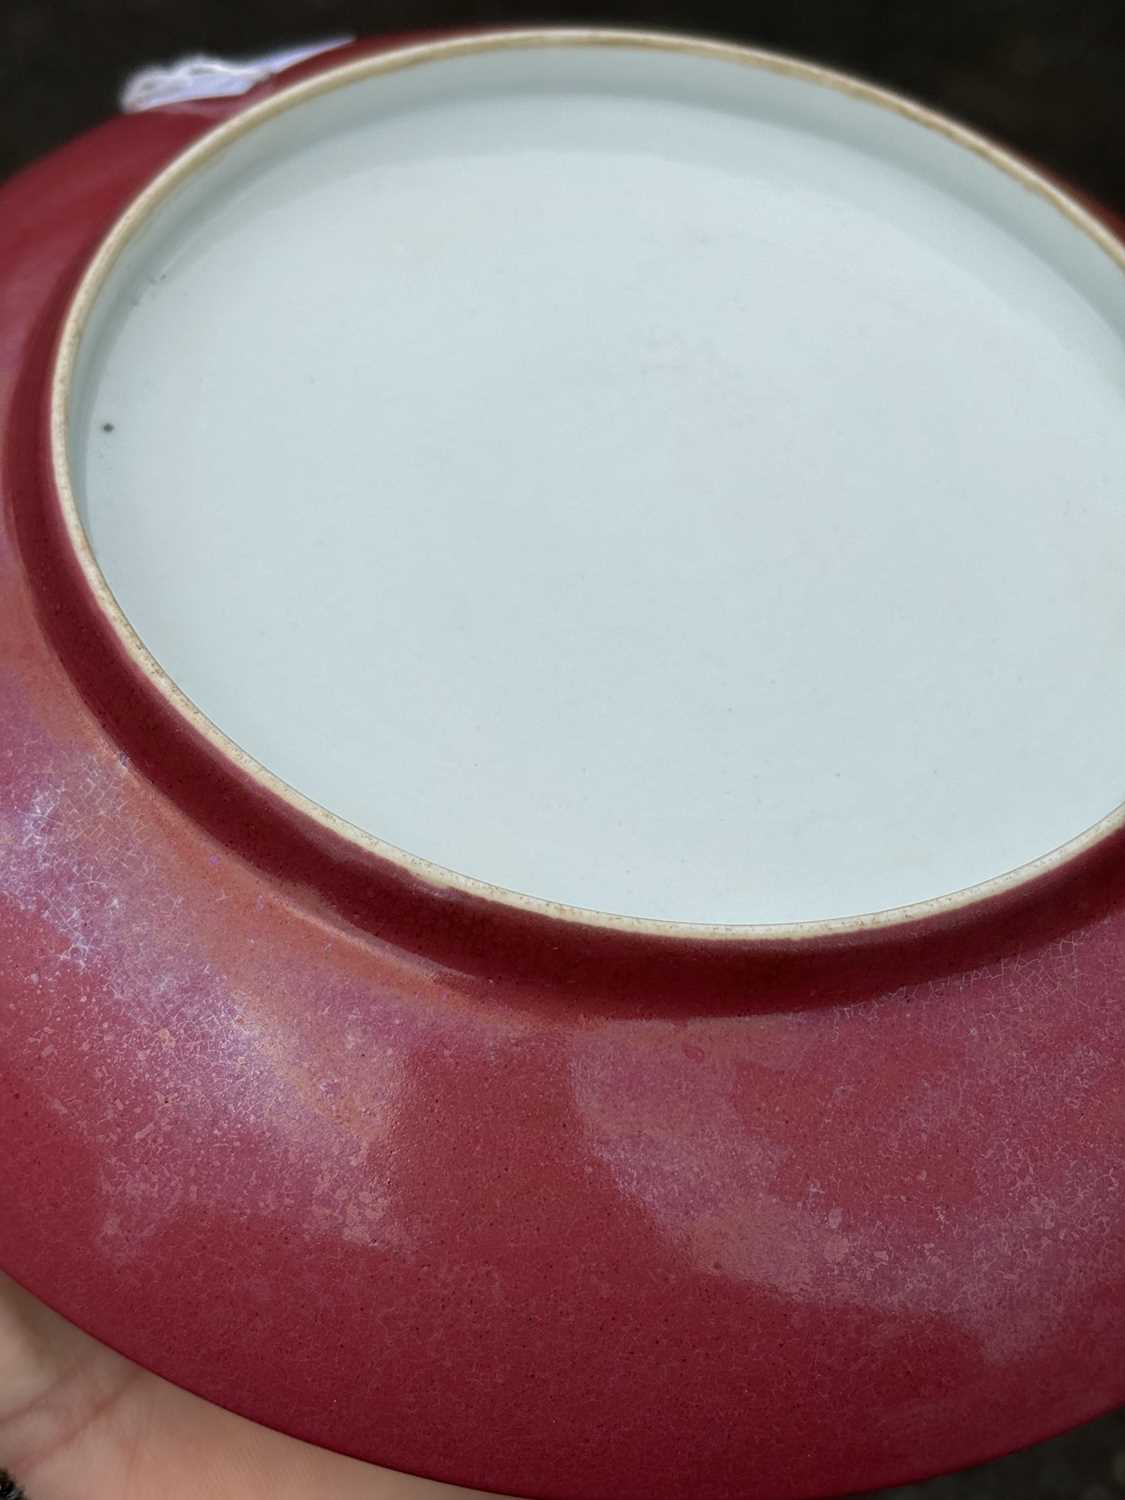 A CHINESE RUBY-BACK 'IMMORTAL' SAUCER DISH - Image 3 of 9